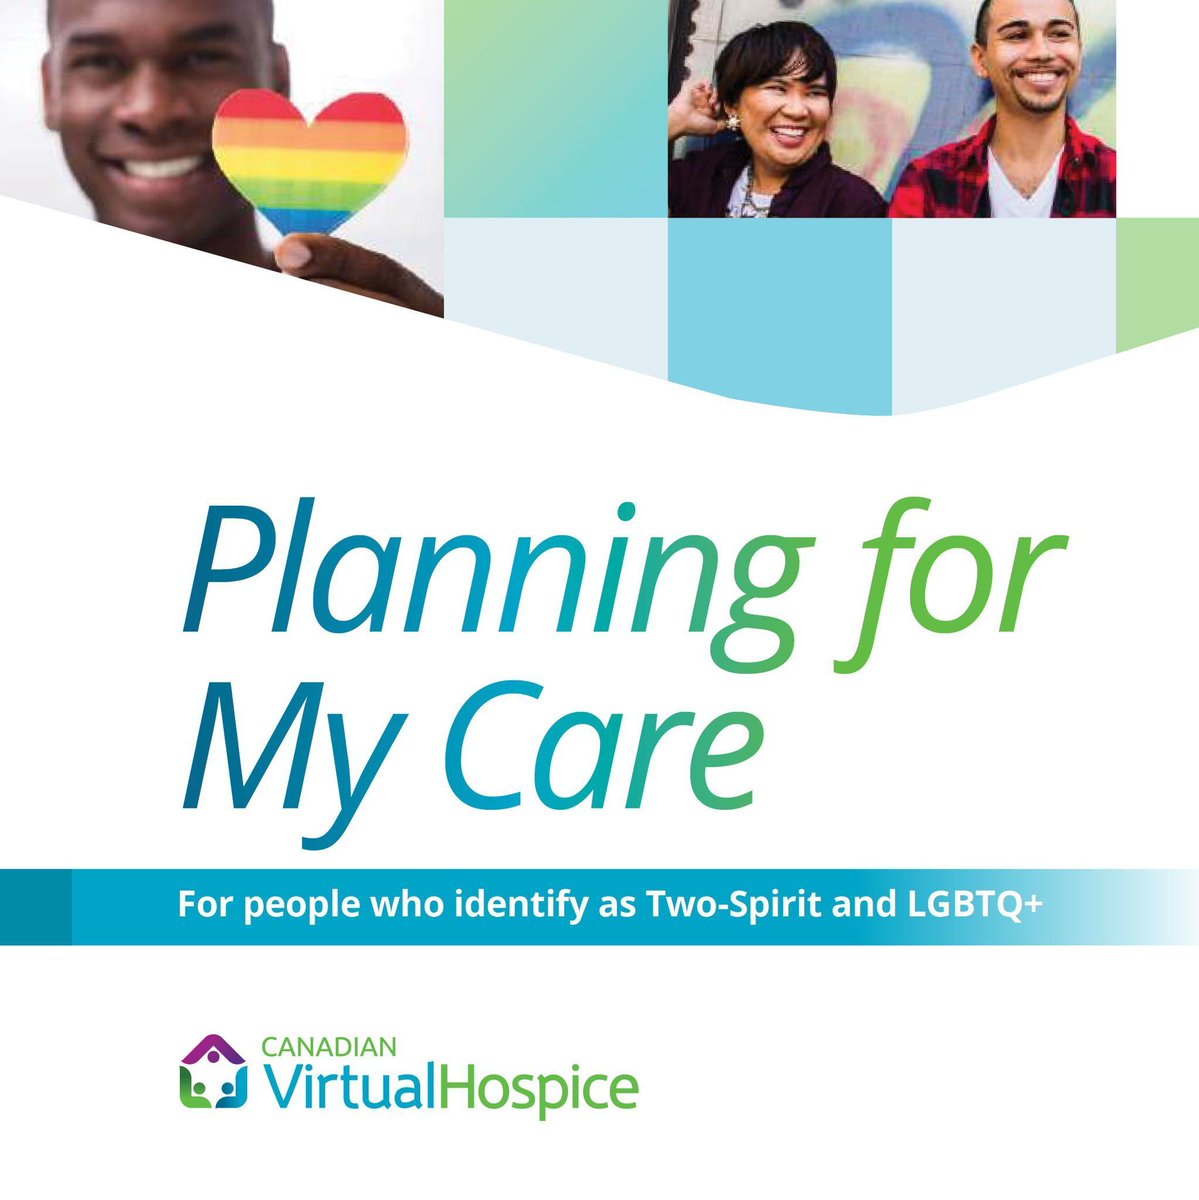 Planning for My Care can help you identify and communicate your wishes for care as a 2SLGBTQ+ community member buff.ly/43xk6ak Visit Proud, Prepared, Protected buff.ly/3TRJBQo for more resources #palliativecare #LGBTQ @enchantenetwork @fondemergence @2SinMotion